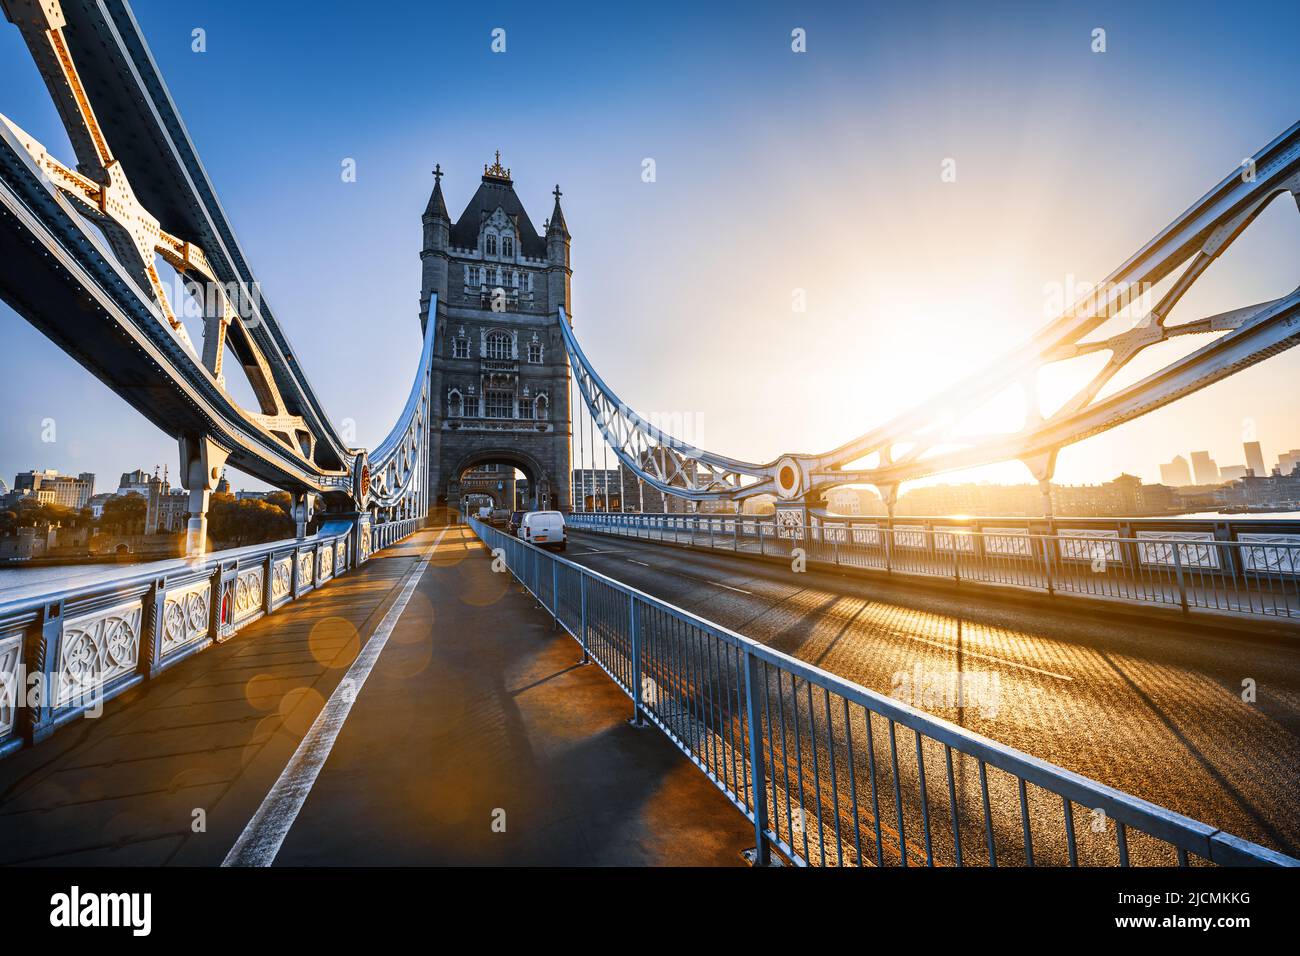 the famous tower bridge of london in the early morning hours Stock Photo